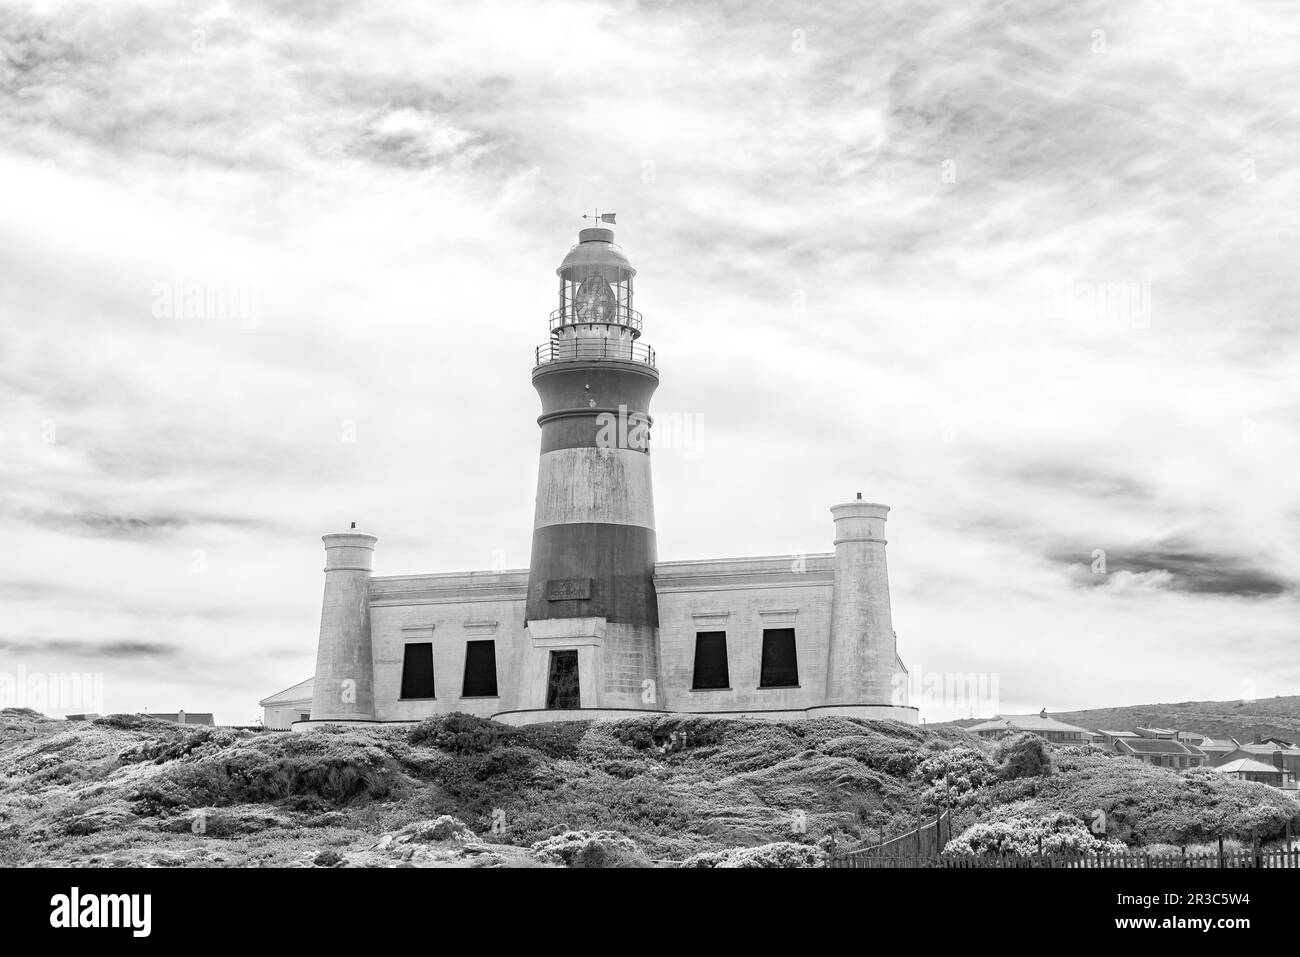 Agulhas National Park, South Africa - Sep 21, 2022: The historic Agulhas lighthouse at the most southern tip of Africa. Monochrome Stock Photo